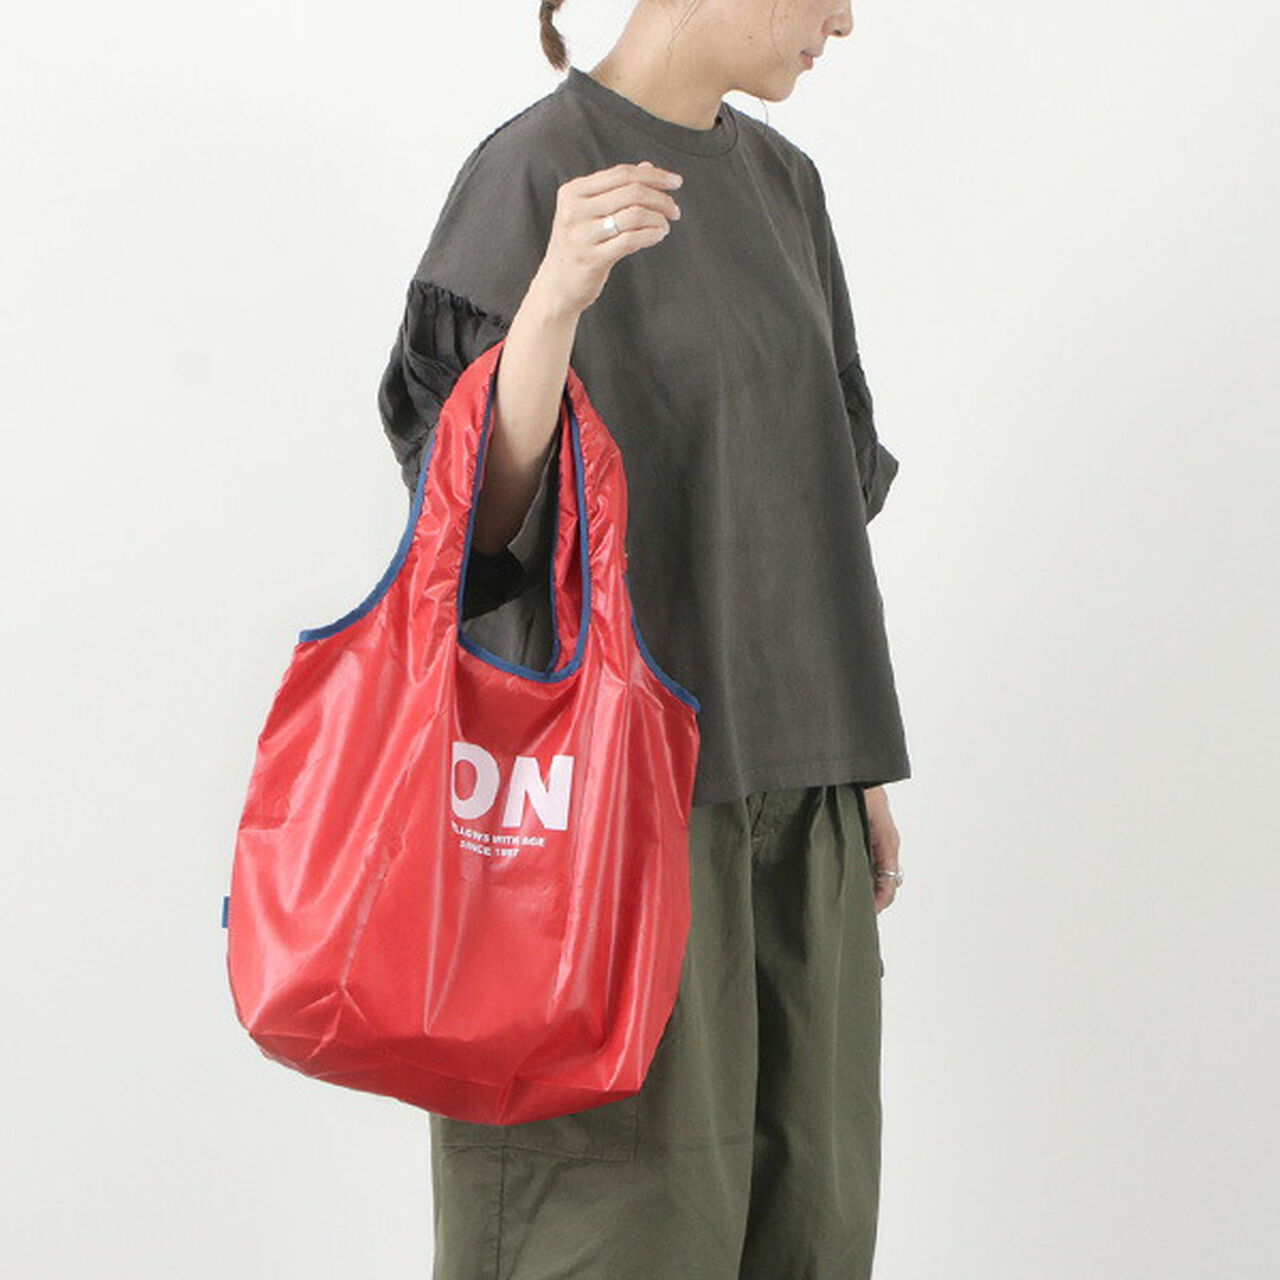 GOOD ON eco tote,Red, large image number 0